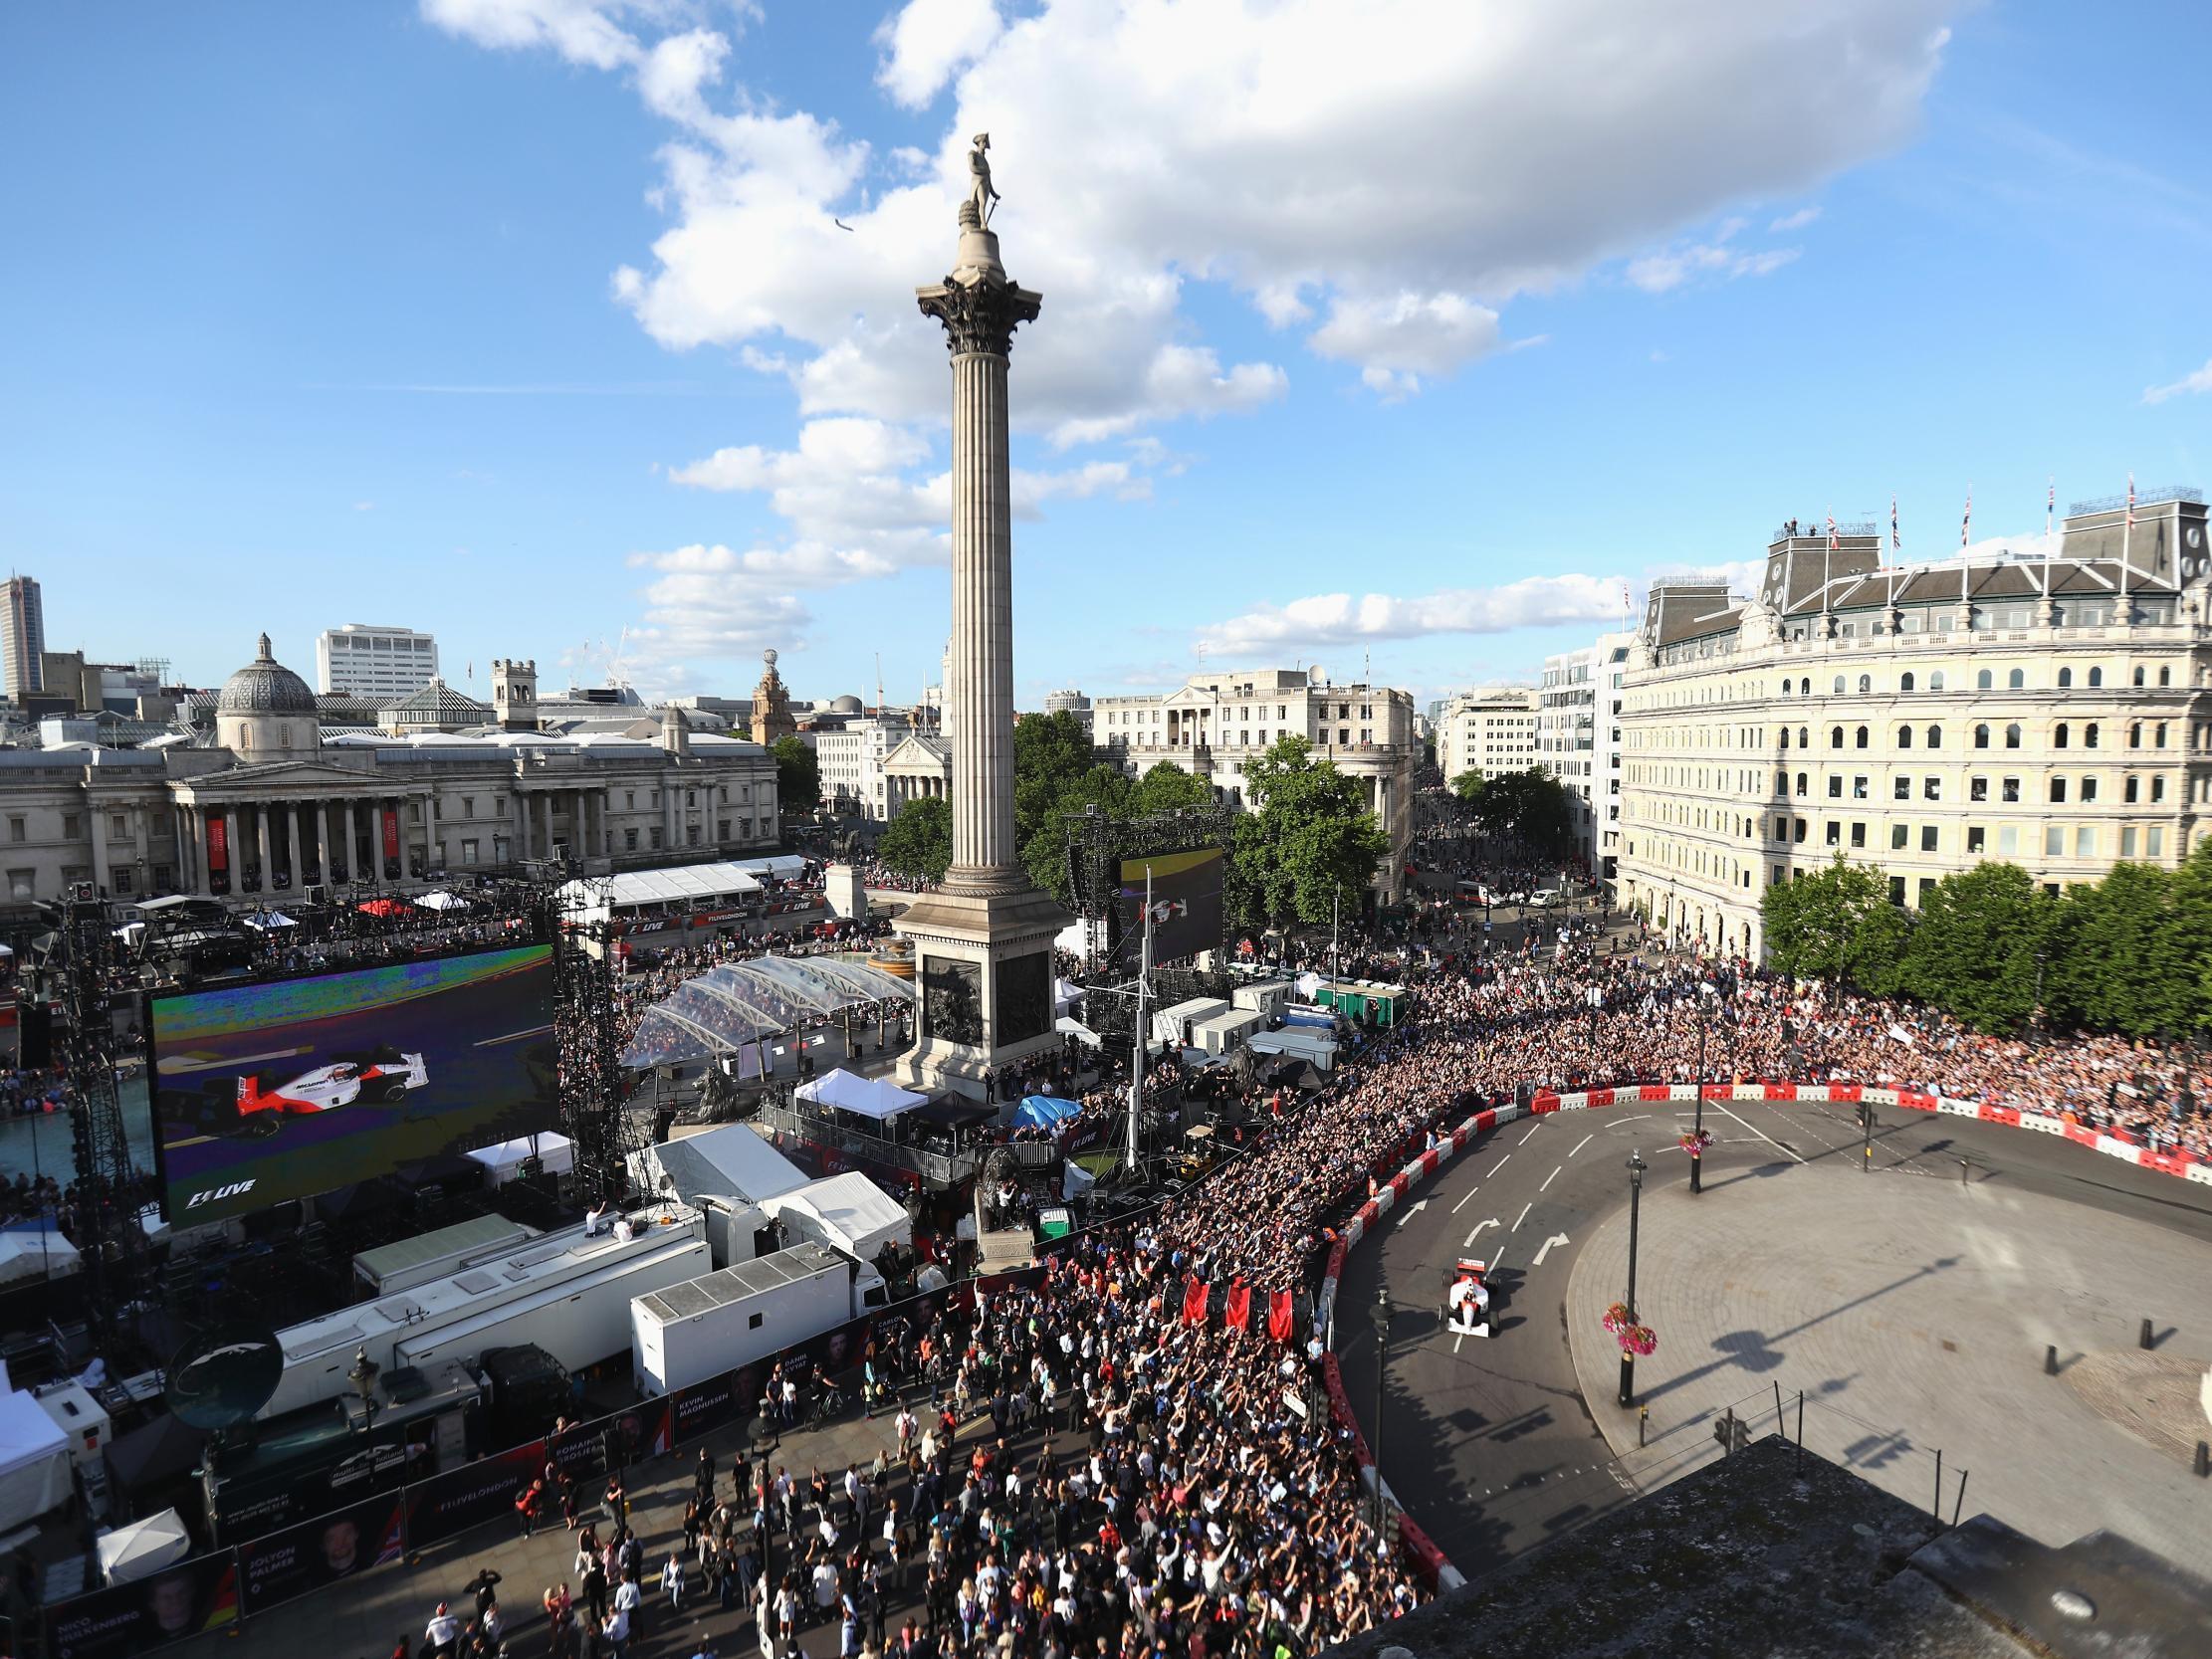 F1 Live was held in and around London's Trafalgar Square in July of last year